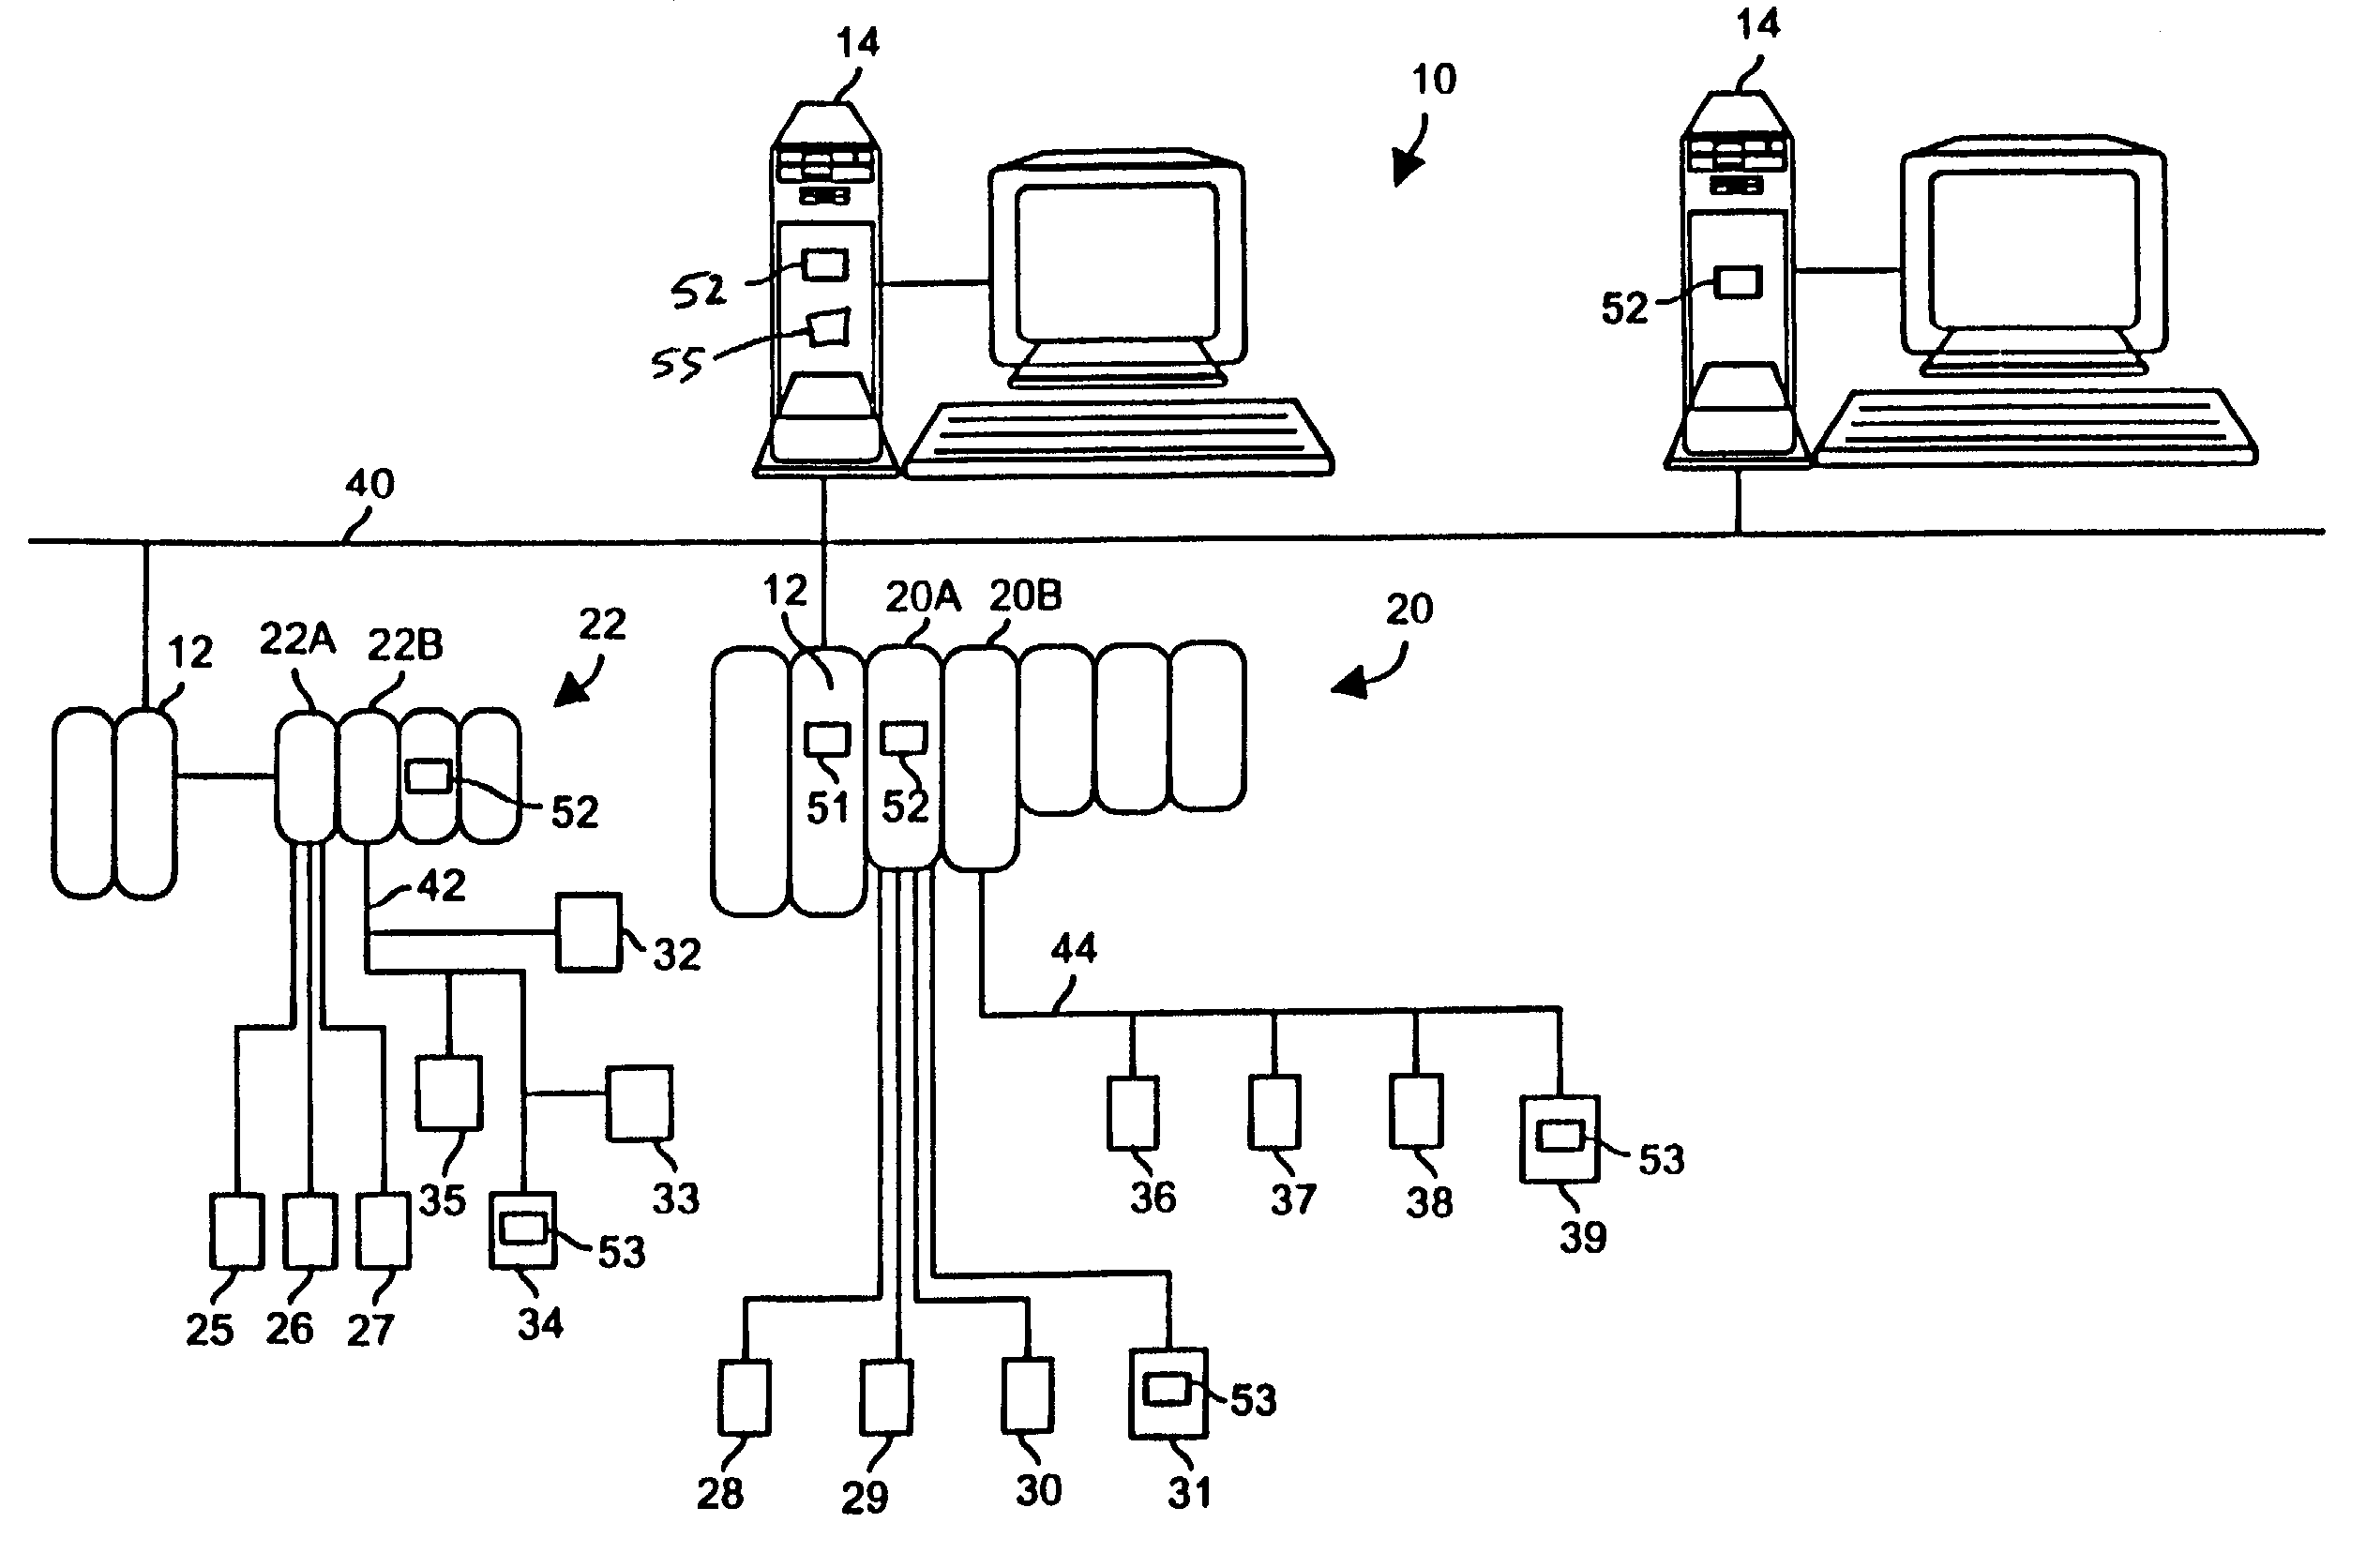 Integrated device alerts in a process control system